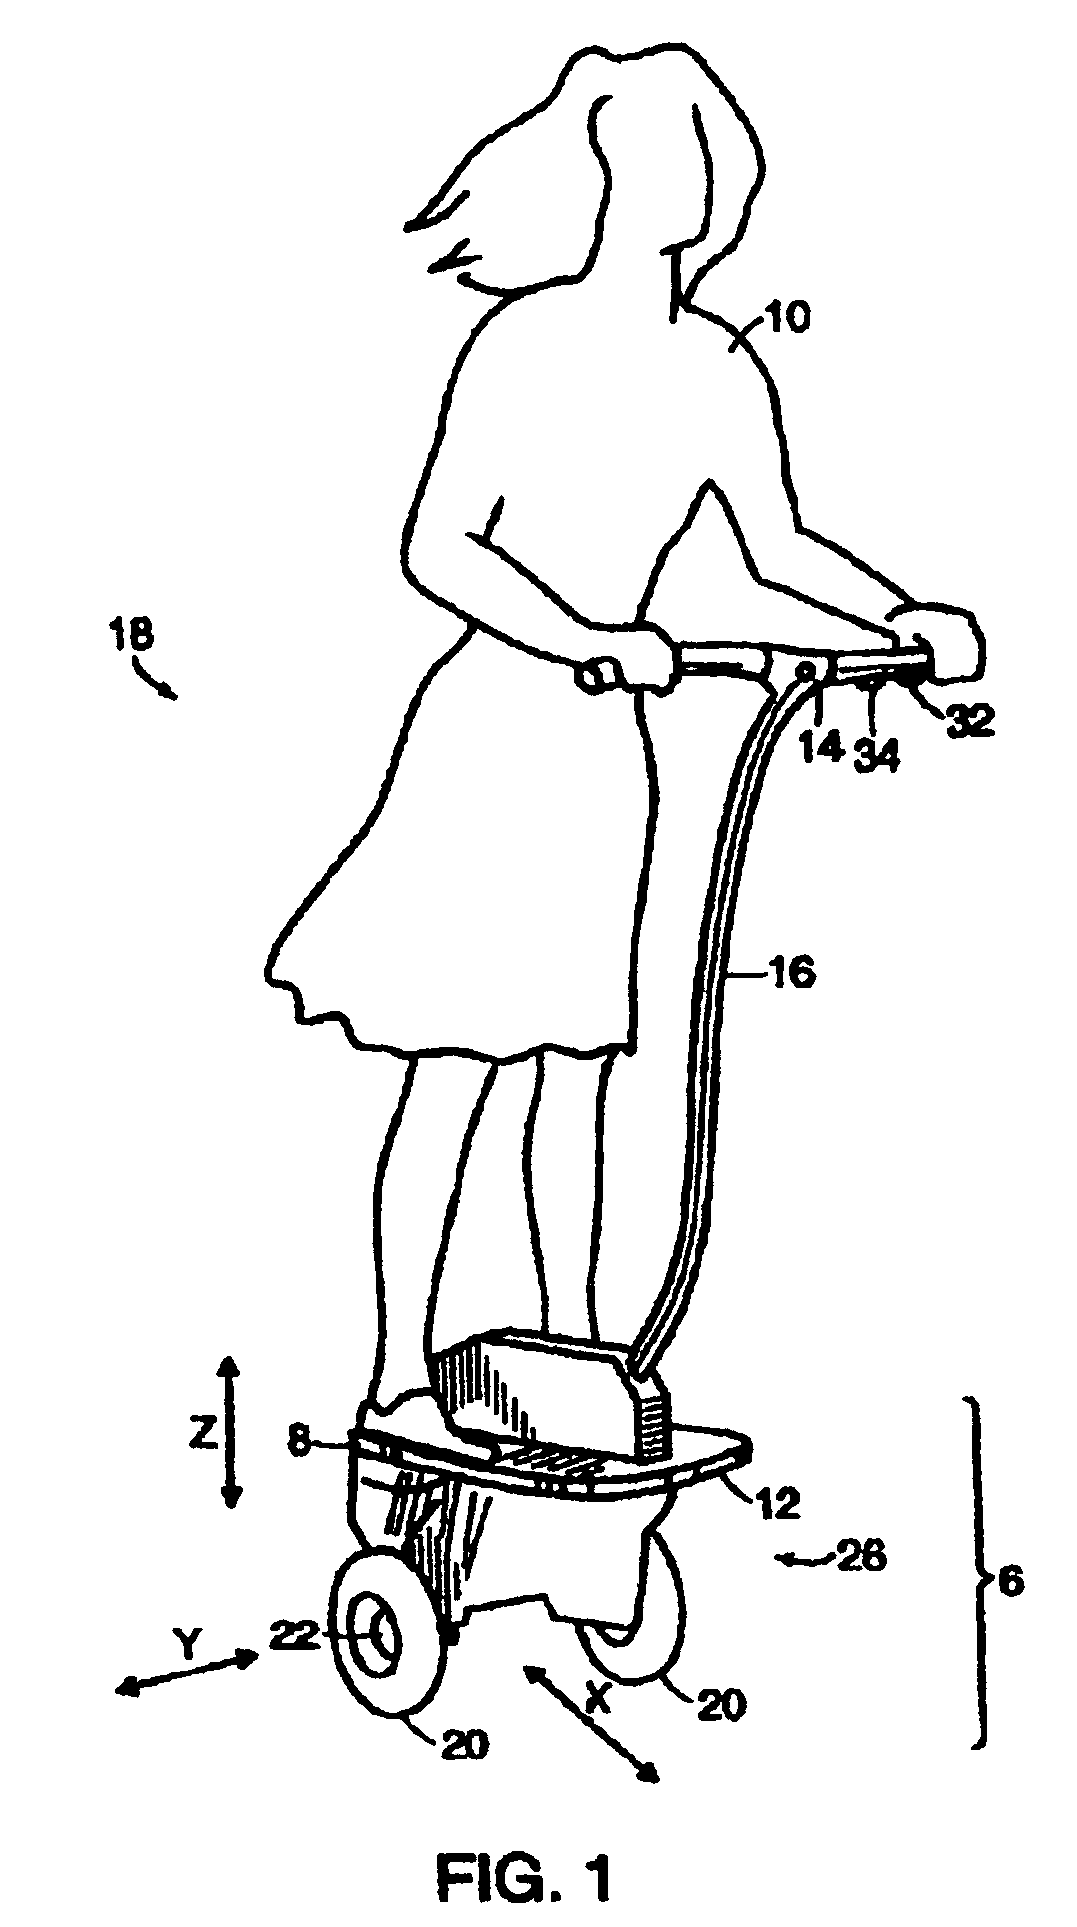 Method for attaching a carrier to a balancing transporter